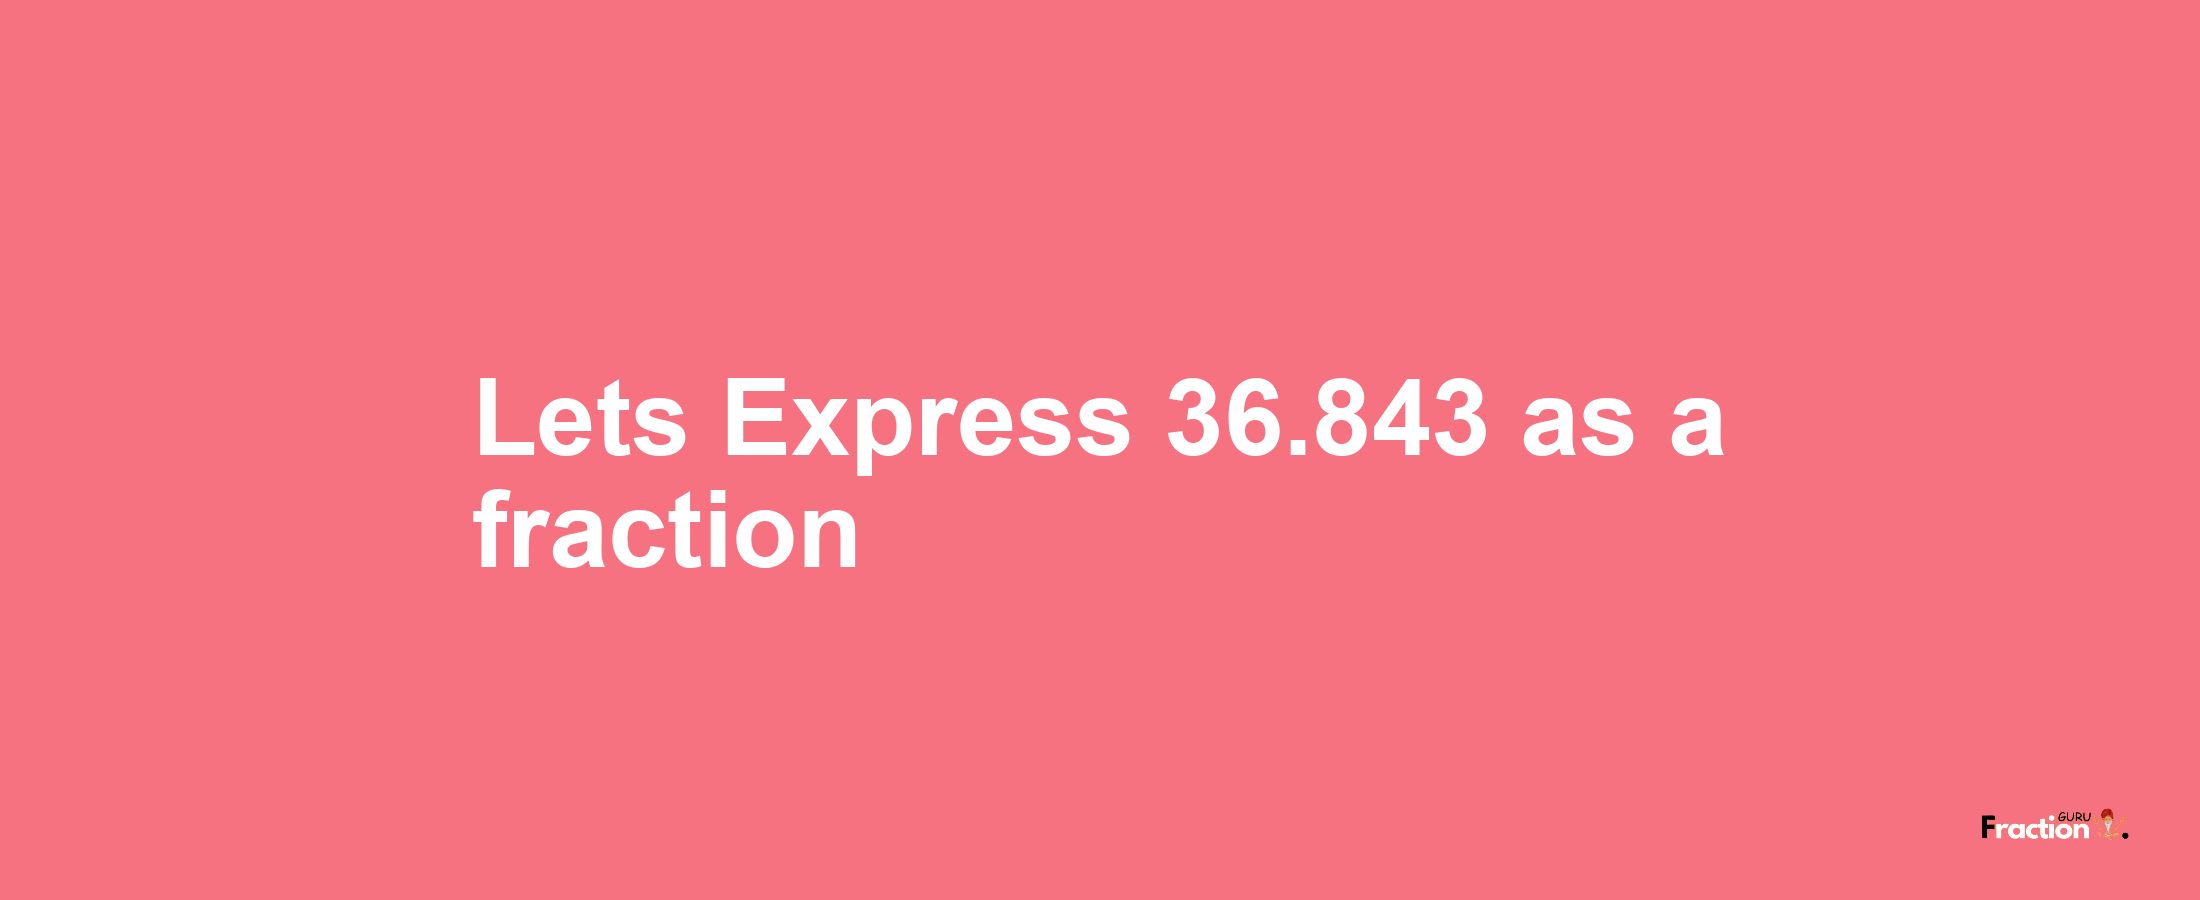 Lets Express 36.843 as afraction